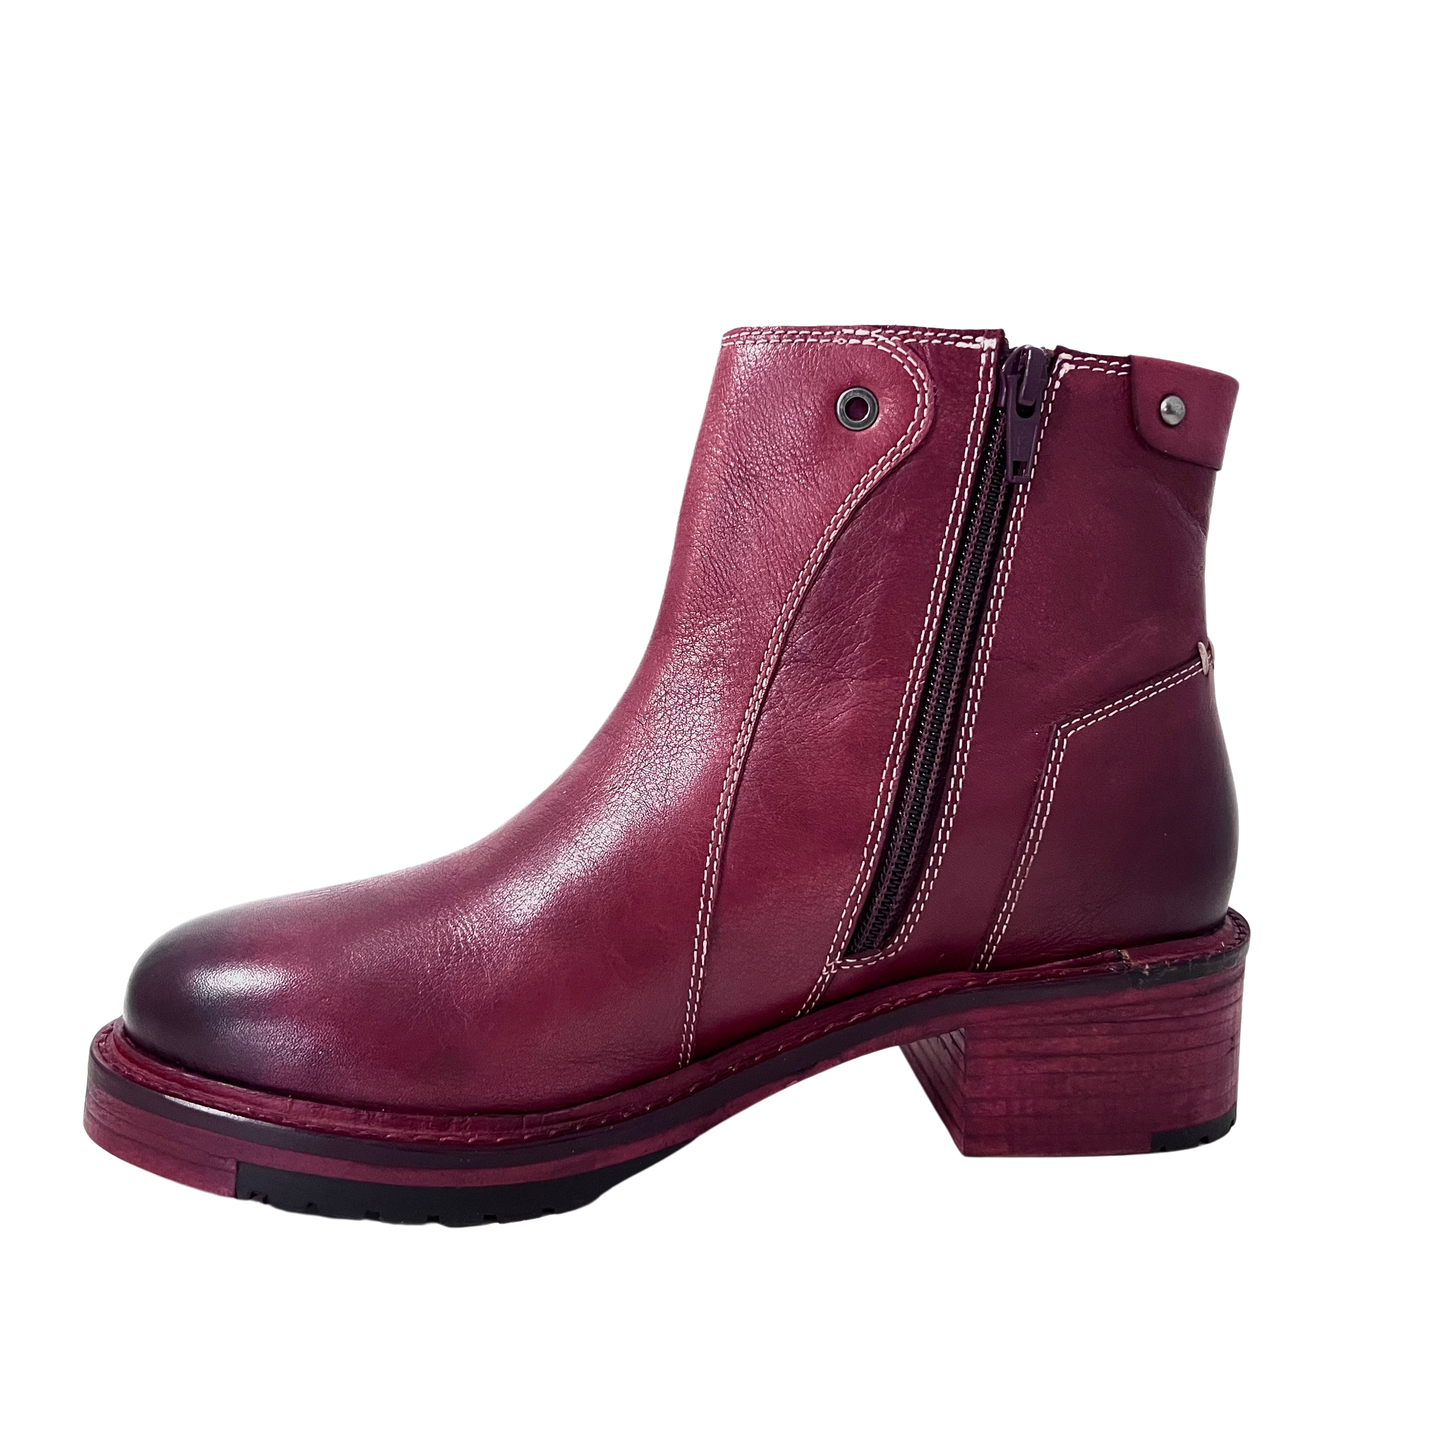 wine color dip dyed vintage leather ladies boot with inside zip